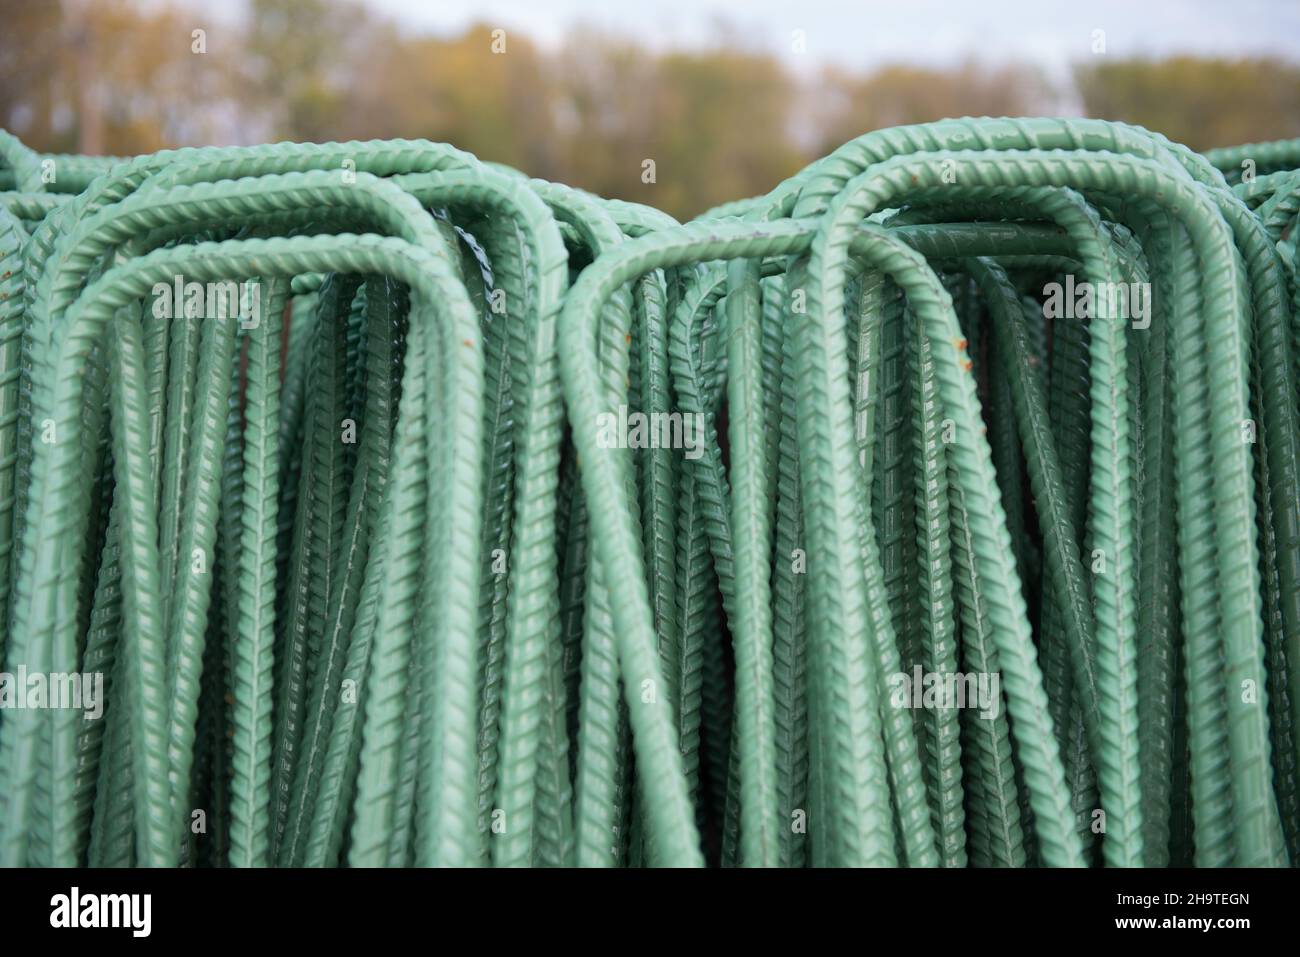 A pile of per-fabricated rebar with a green epoxy coating for corrosion resistance is ready for installation at an infrastructure project. Stock Photo